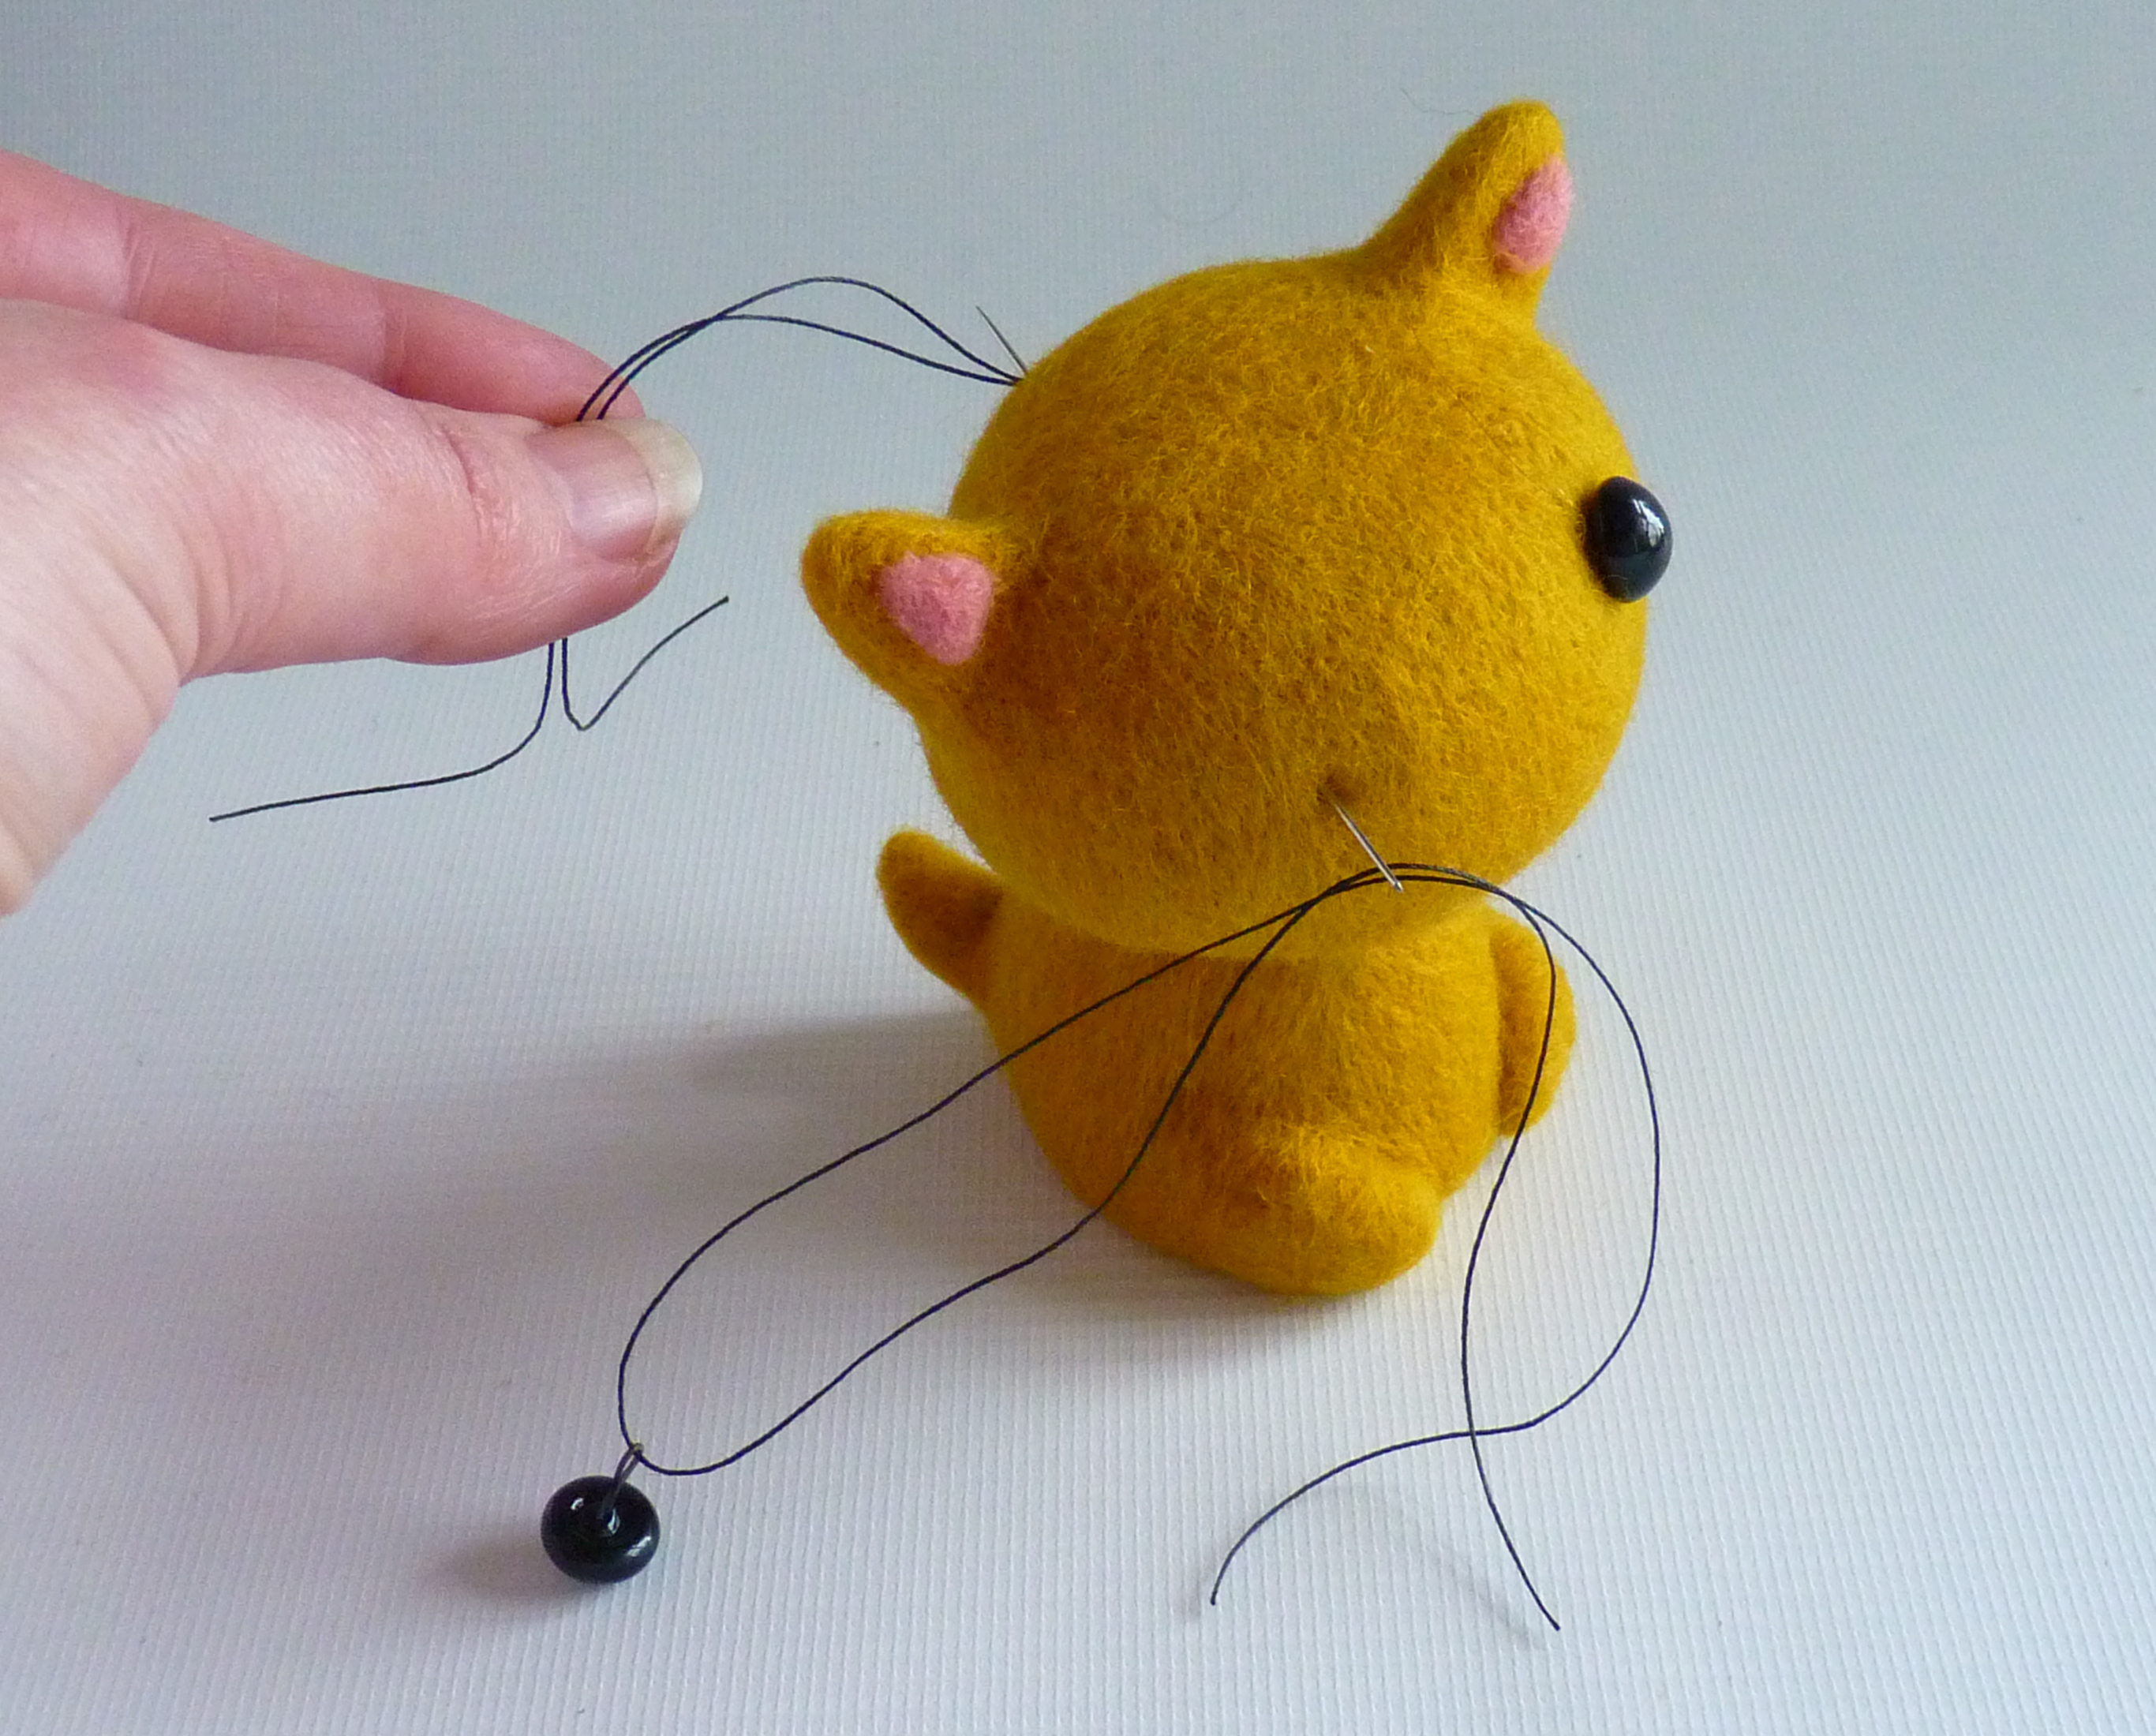 How to make needle felted animals - step 16